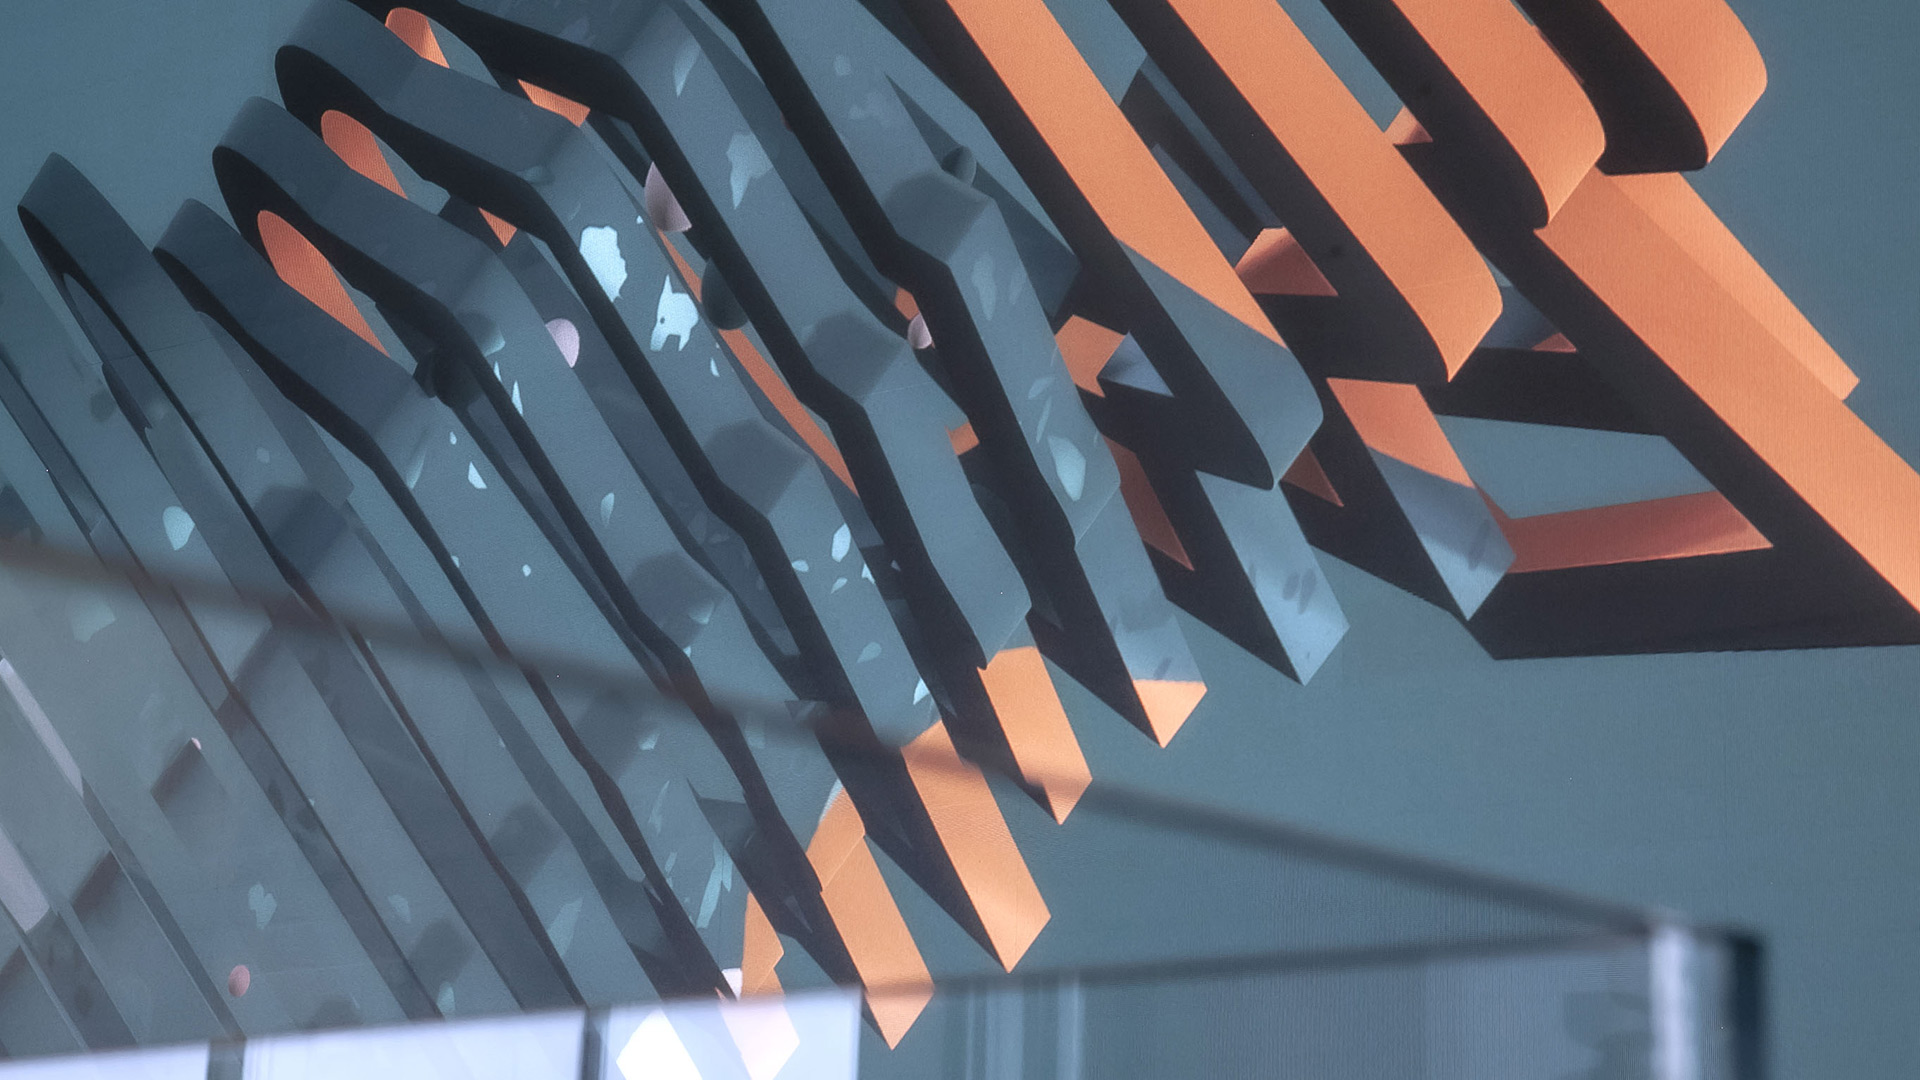 A close up and side view of the digital art sculpture called Day.